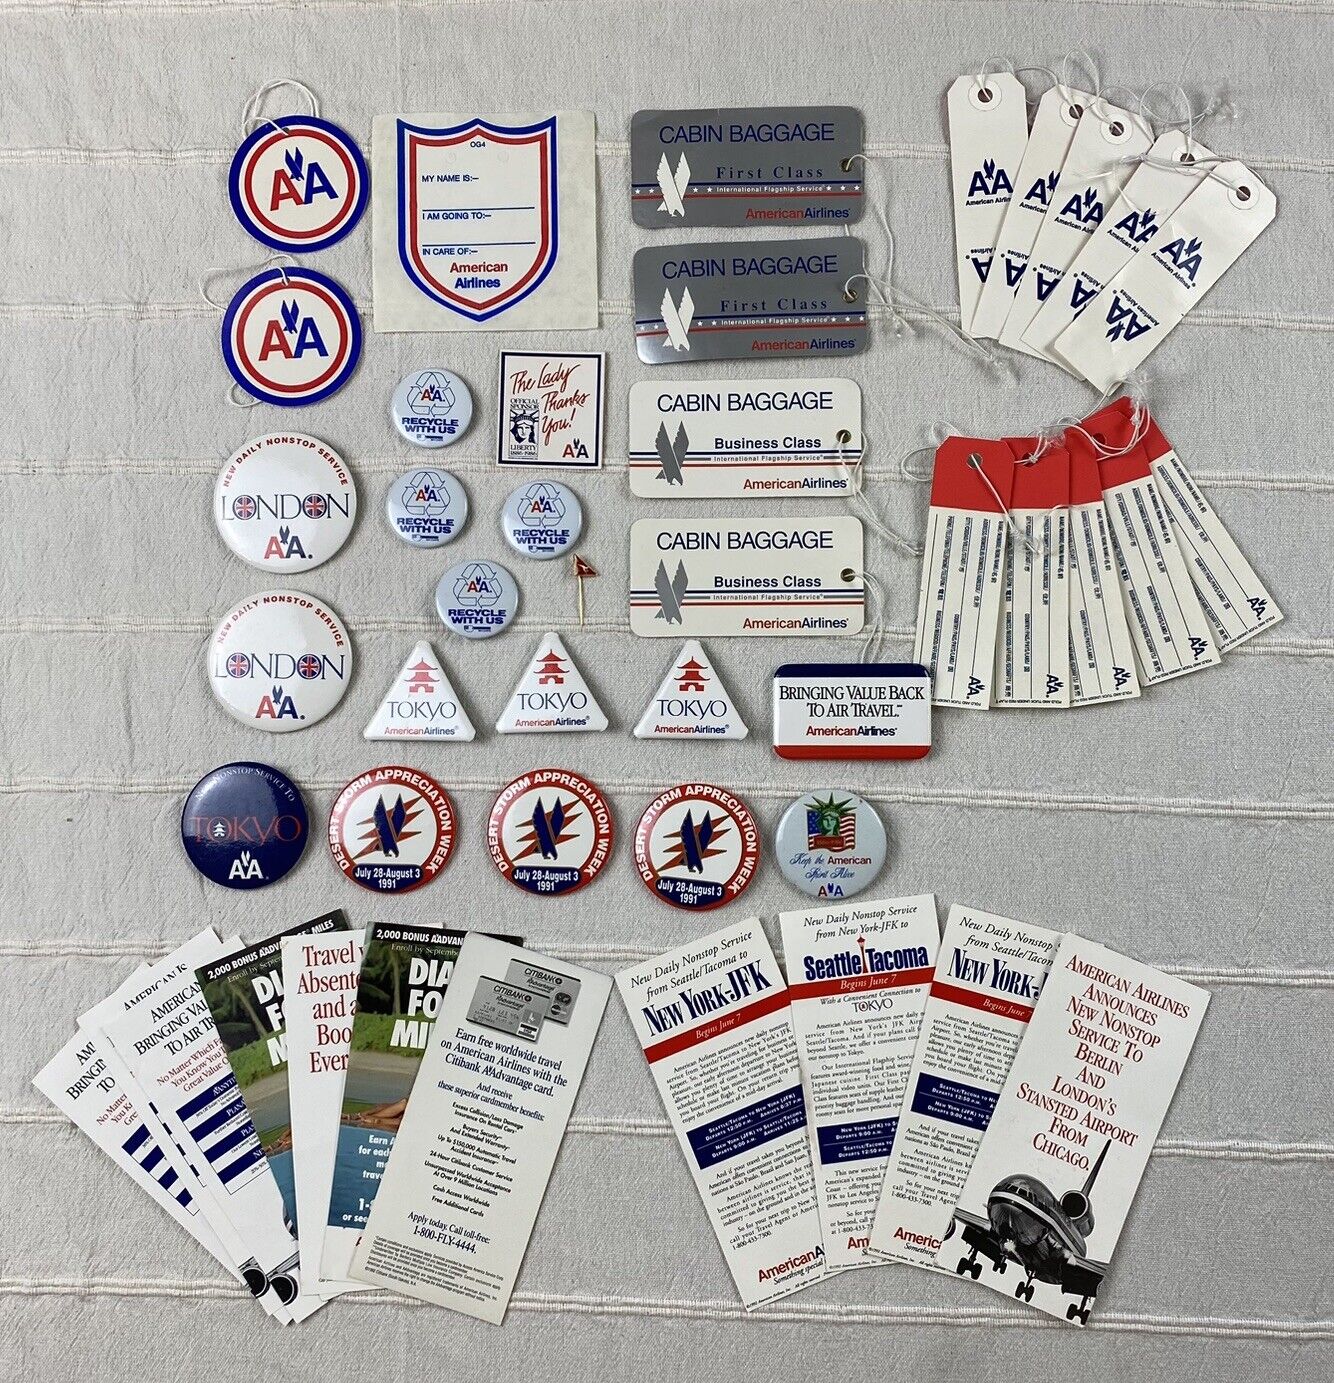 VTG 80s 90s American Airlines Memorabilia - Pins Stickers Luggage Tags Adverts+